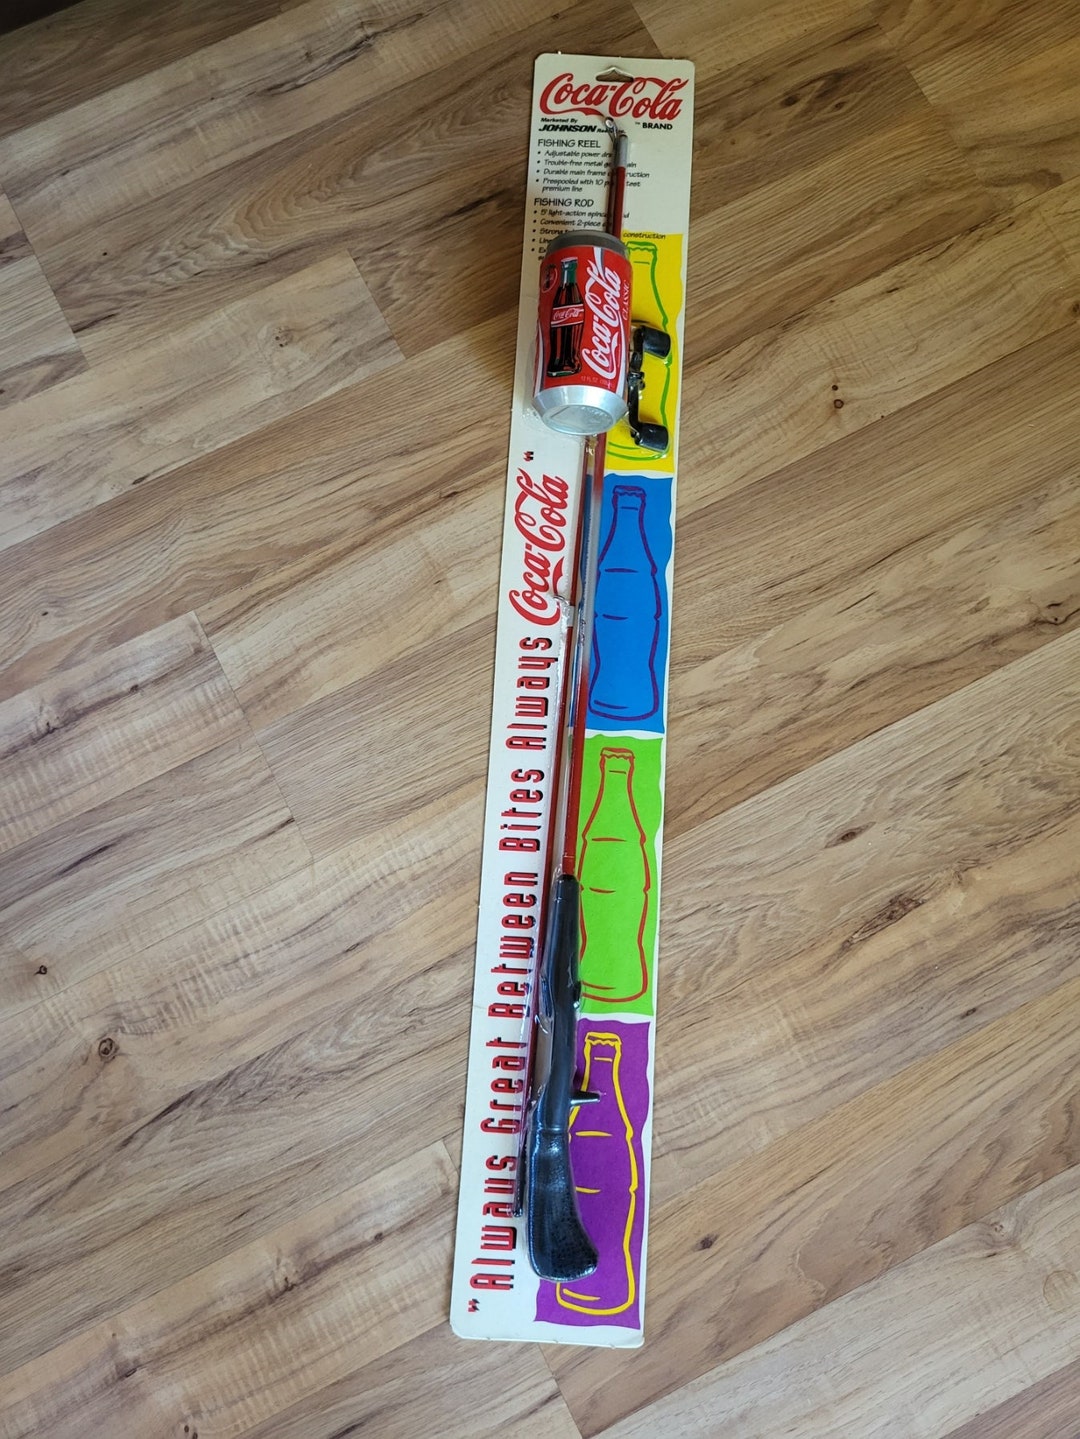 Coca-Cola Fishing Rod and Reel